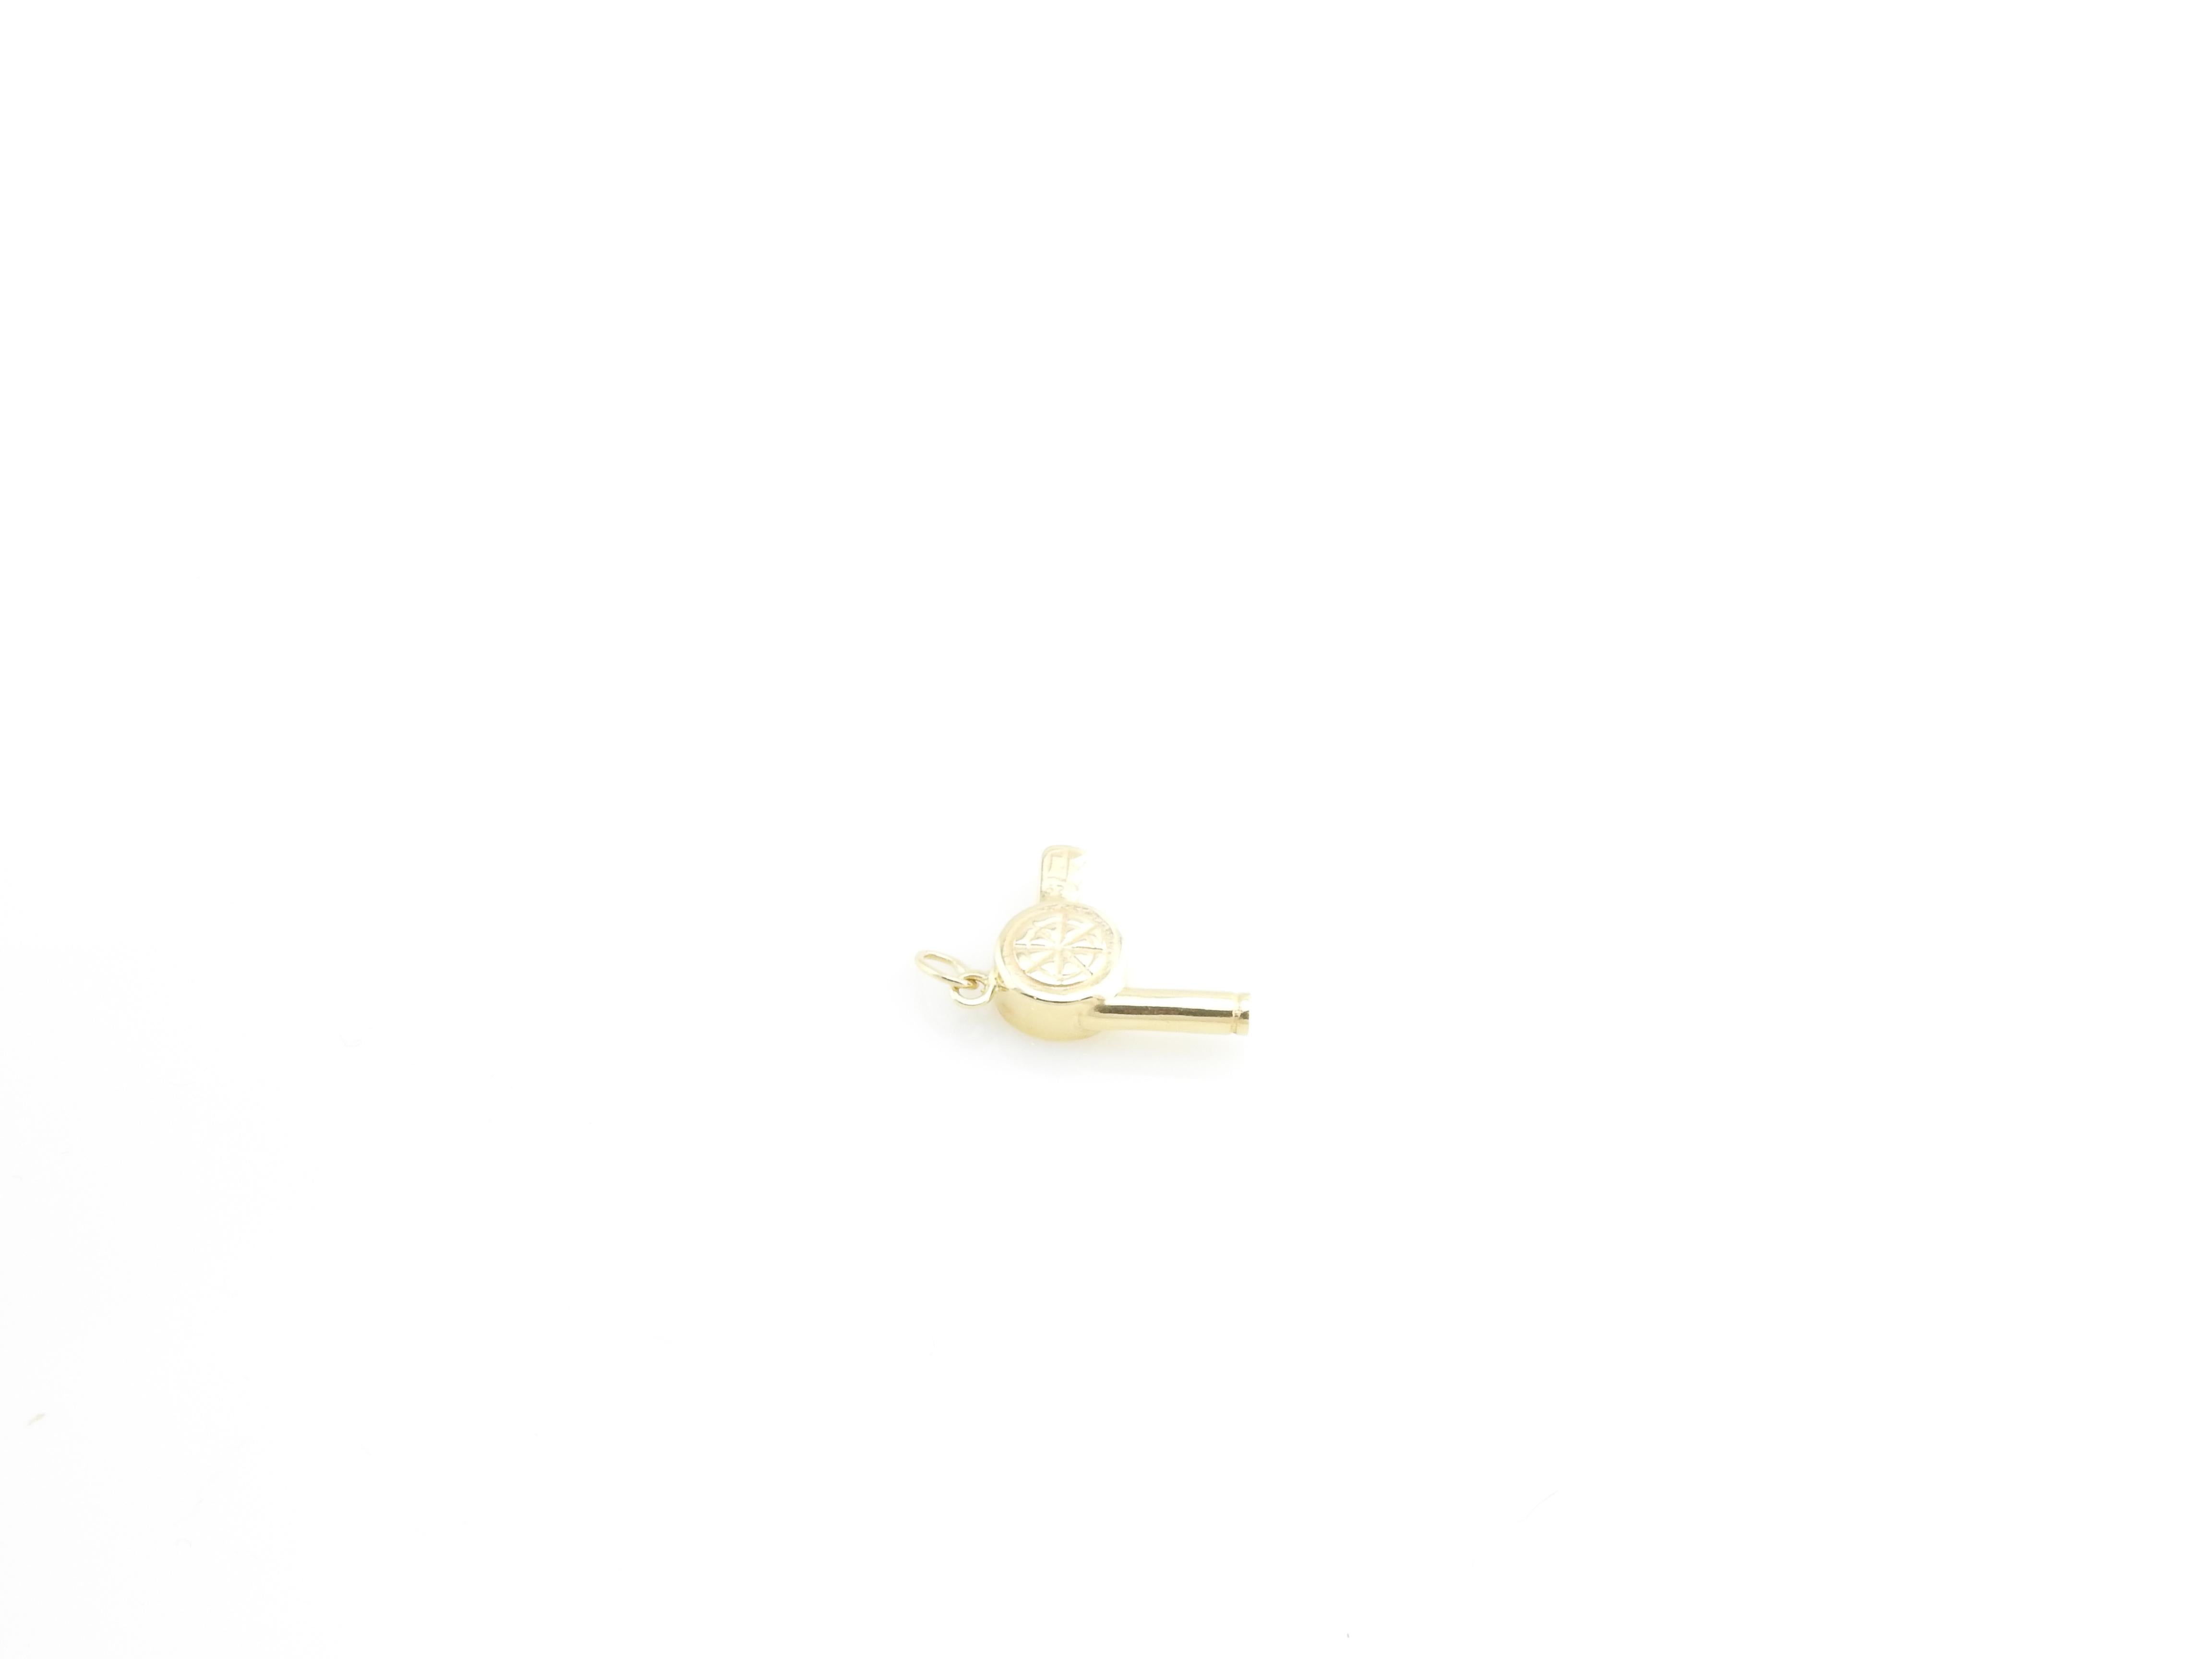 Vintage 14 Karat Yellow Gold Hair Dryer Charm

Perfect for the hair stylist in your life!

This lovely 3D charm features a miniature hair dryer meticulously detailed in 14K yellow gold.

Size: 15 mm x 20 mm (actual charm)

Weight: 1.6 dwt. / 2.4